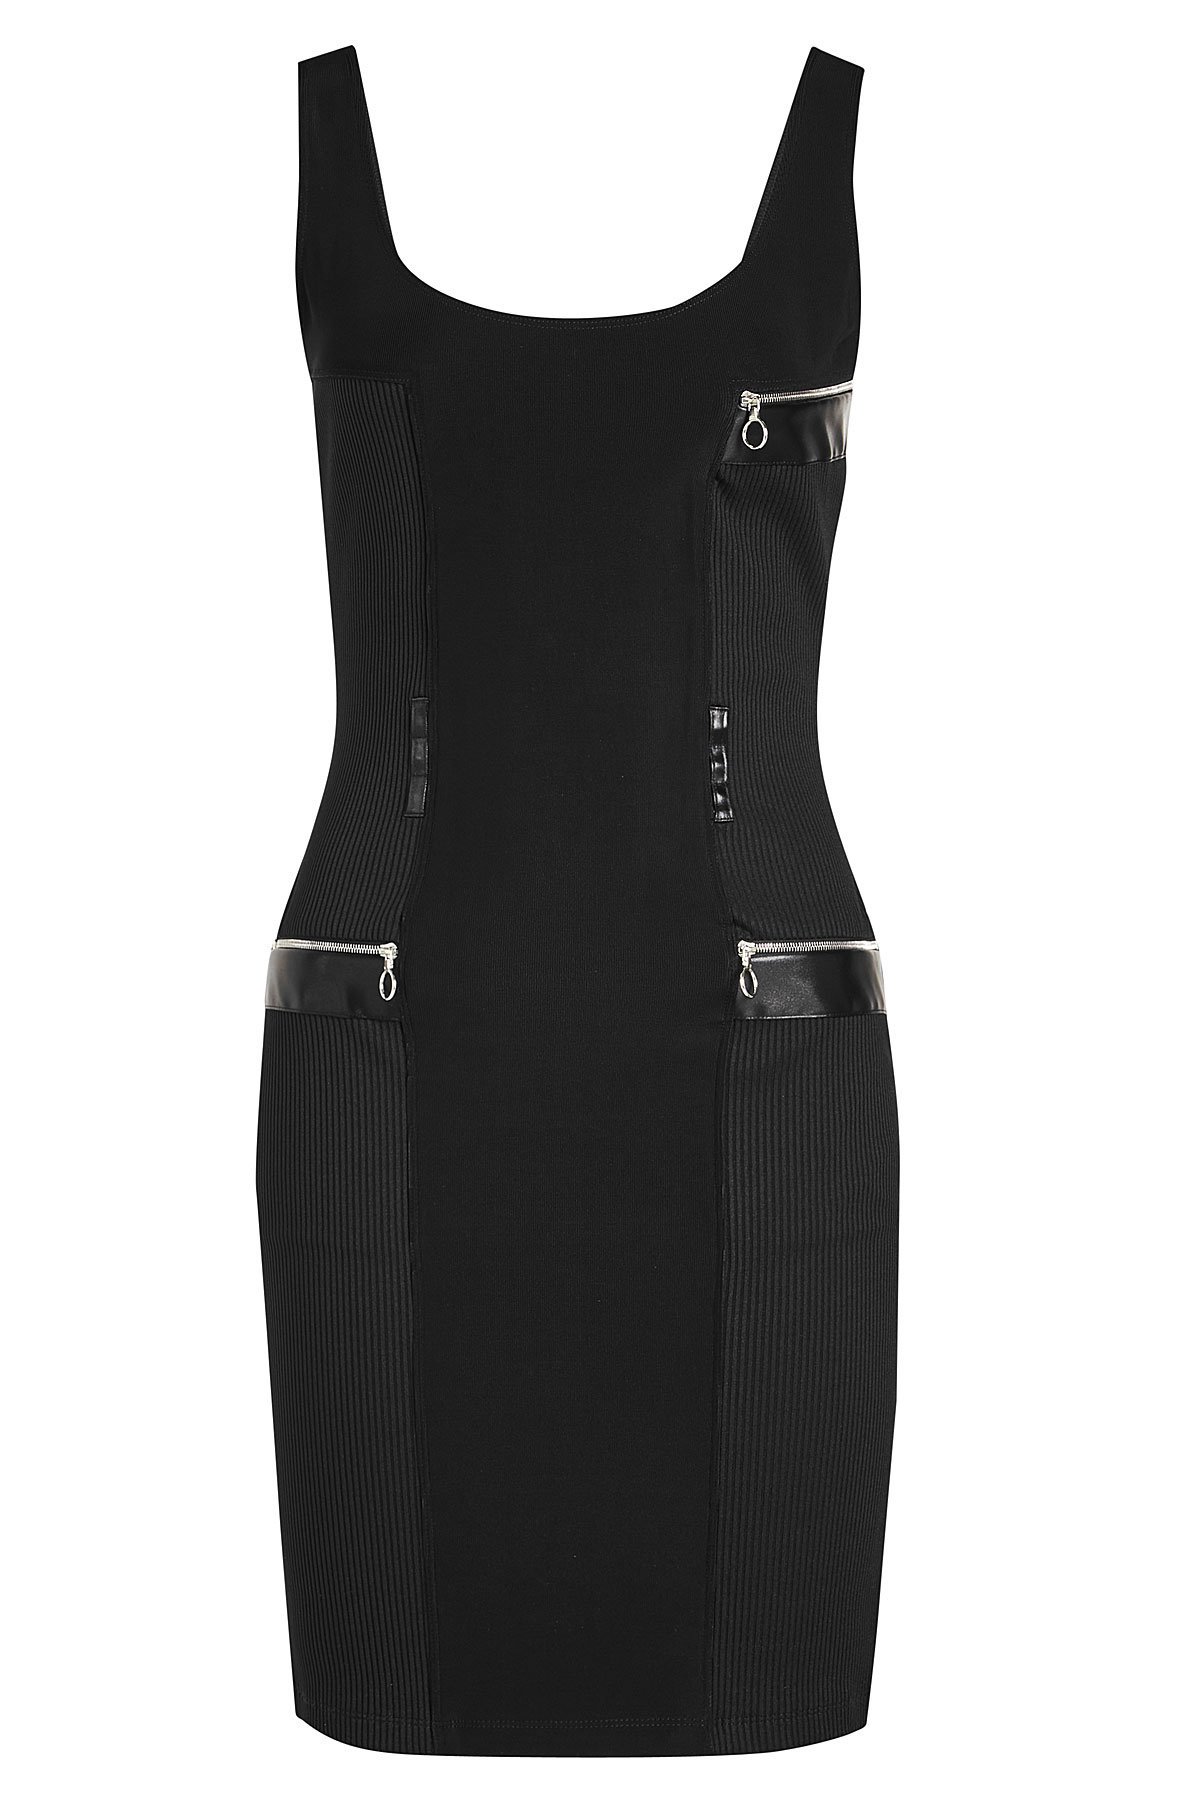 Paco Rabanne - Fitted Tank Dress with Zipped Pockets